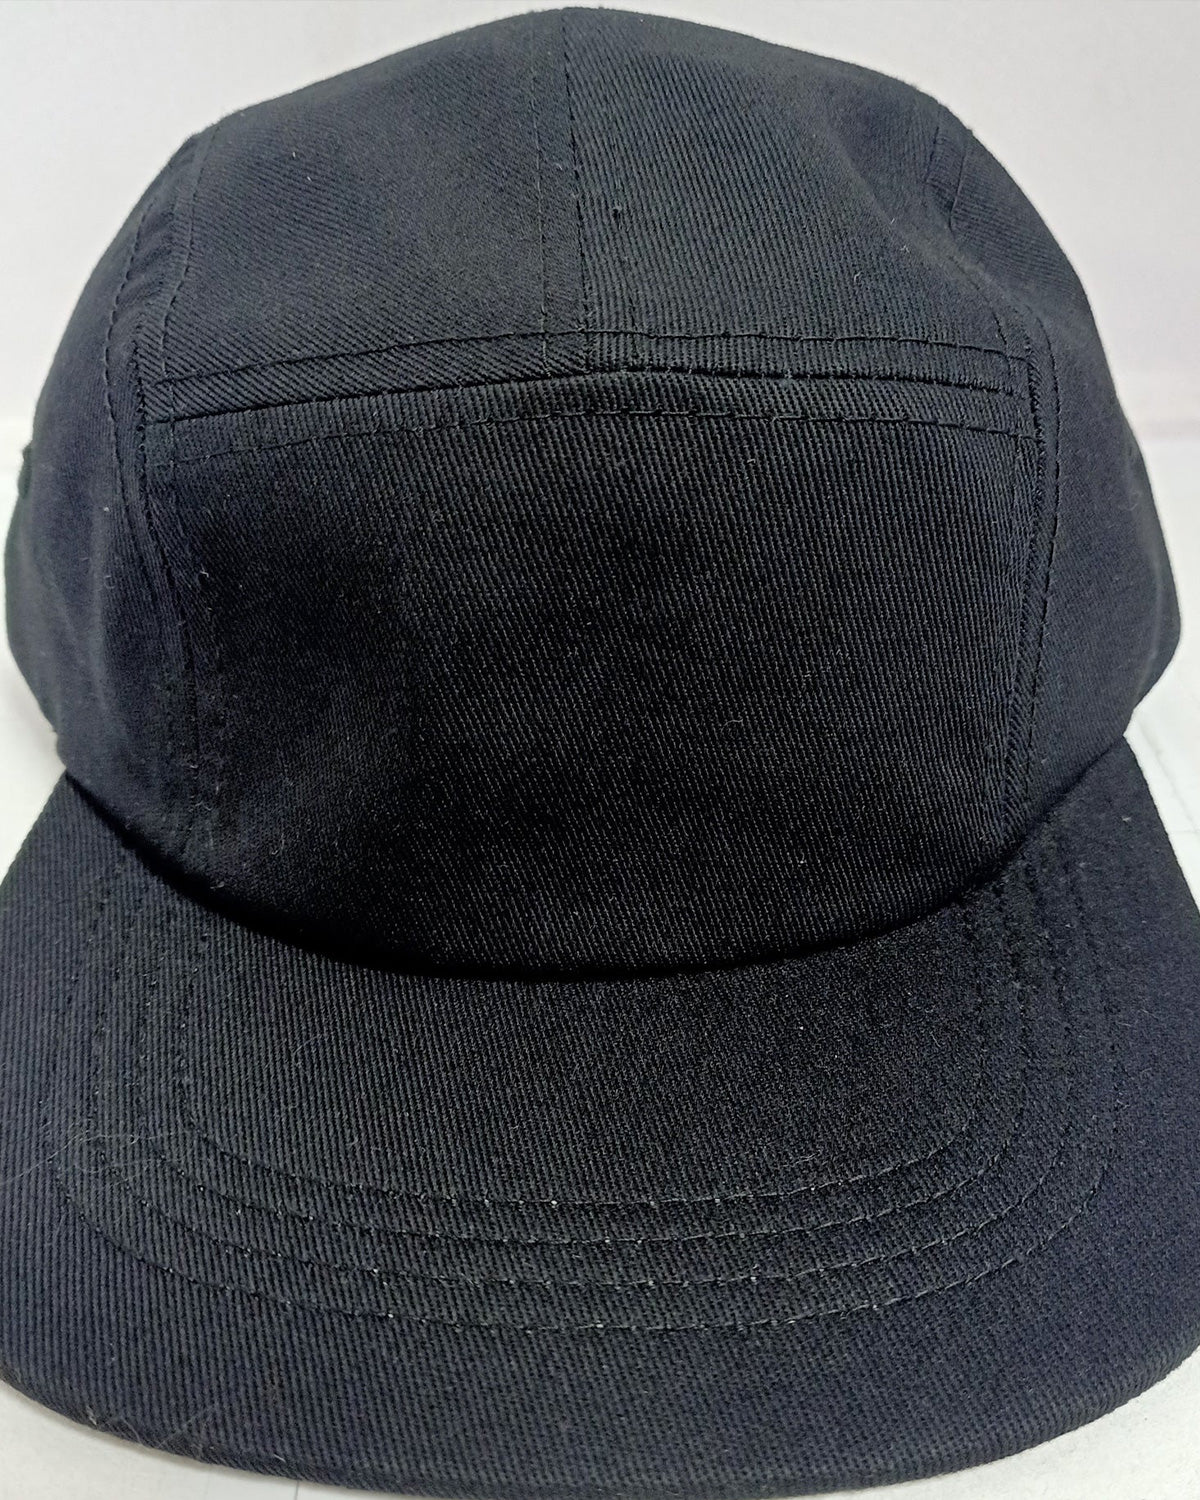 front view of hat